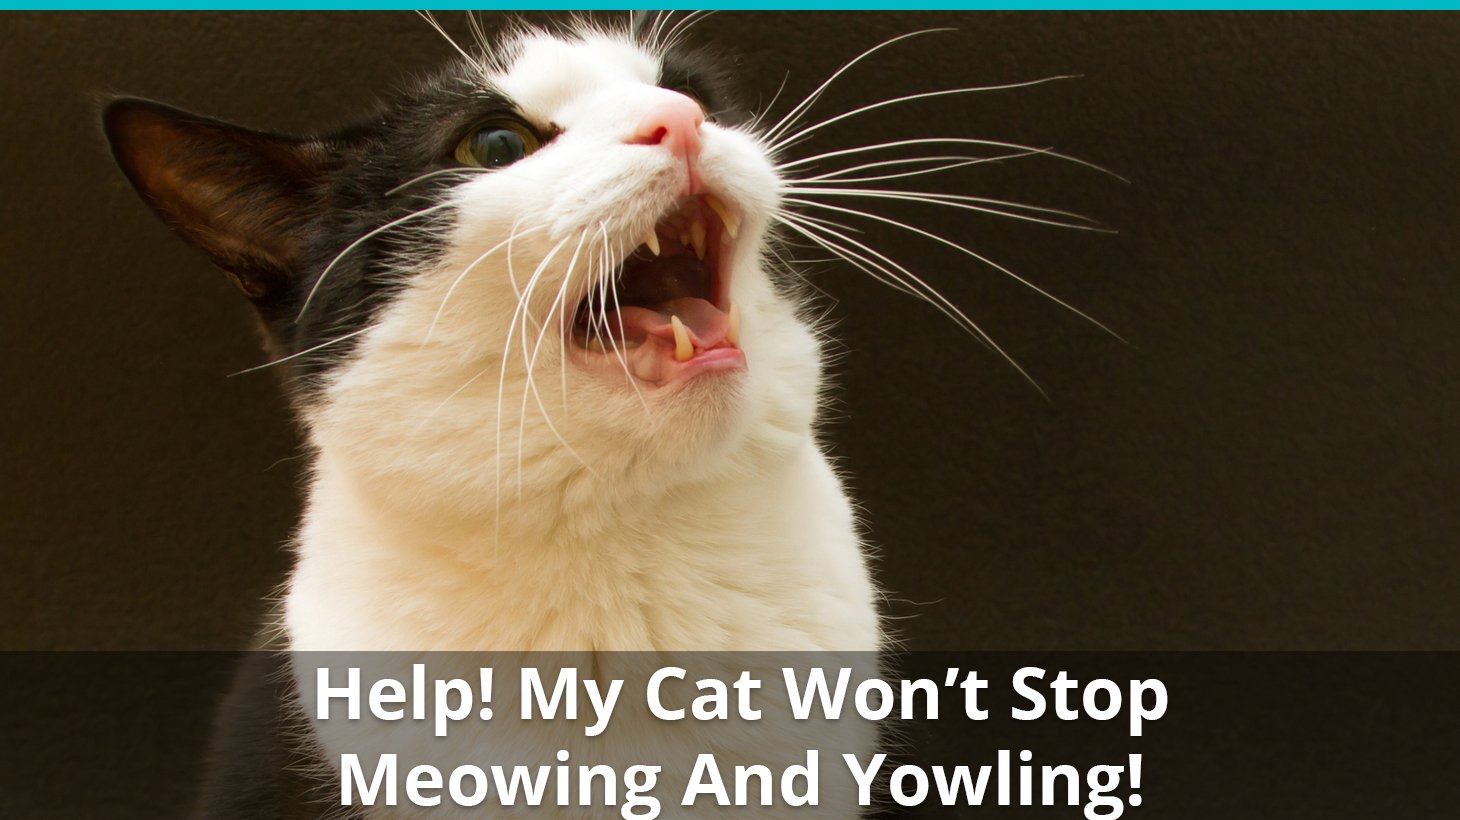 What To Do If Your Cat Won't Stop Meowing Or Yowling How To Stop It